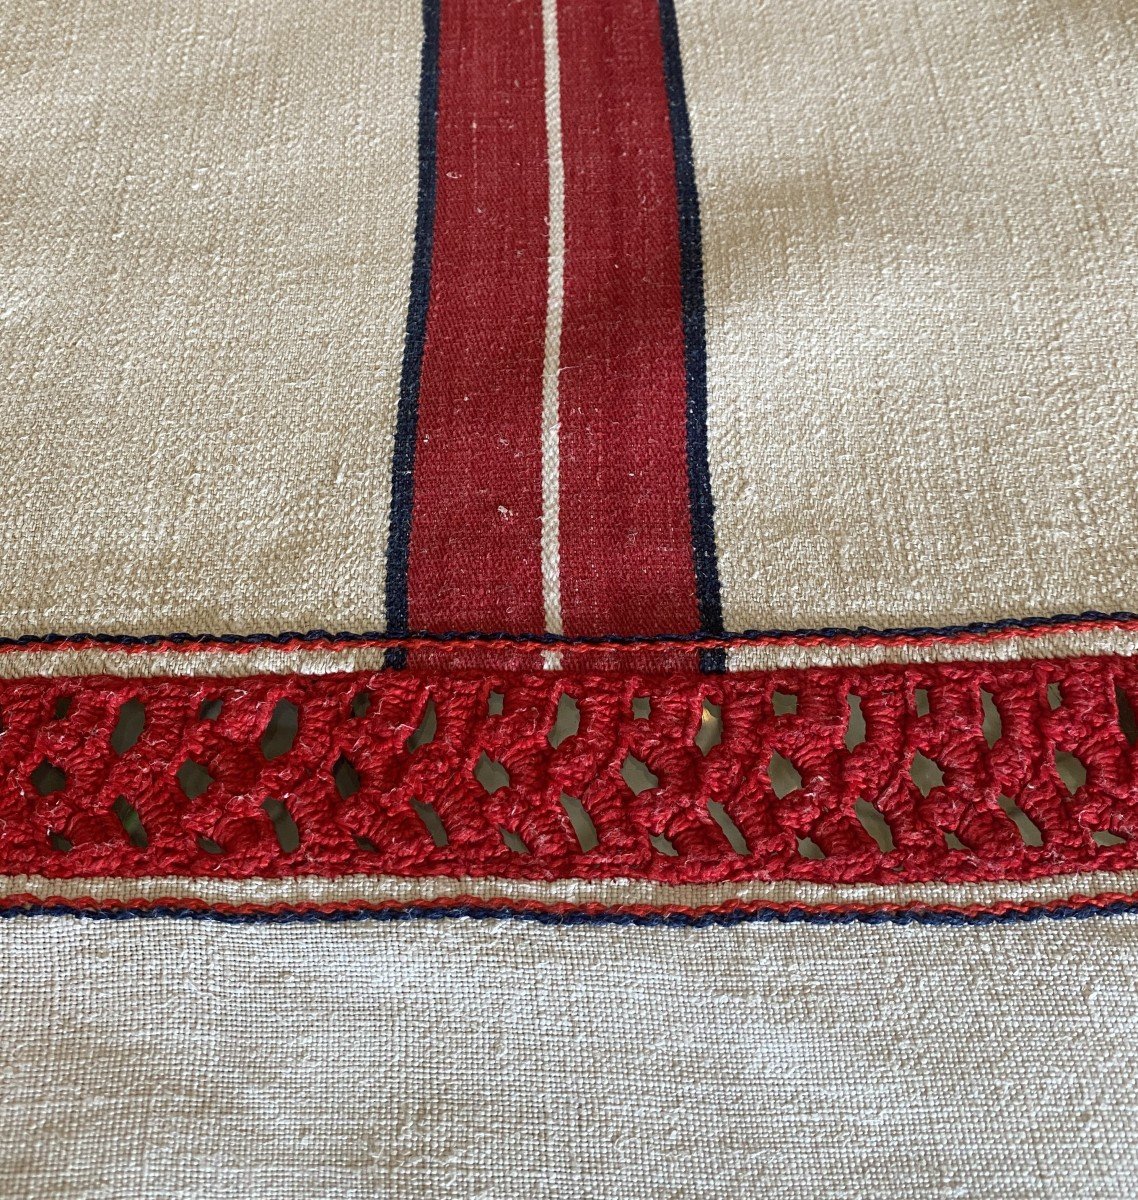 Rustic Hemp Tablecloth With Red Stripes 19th-photo-4